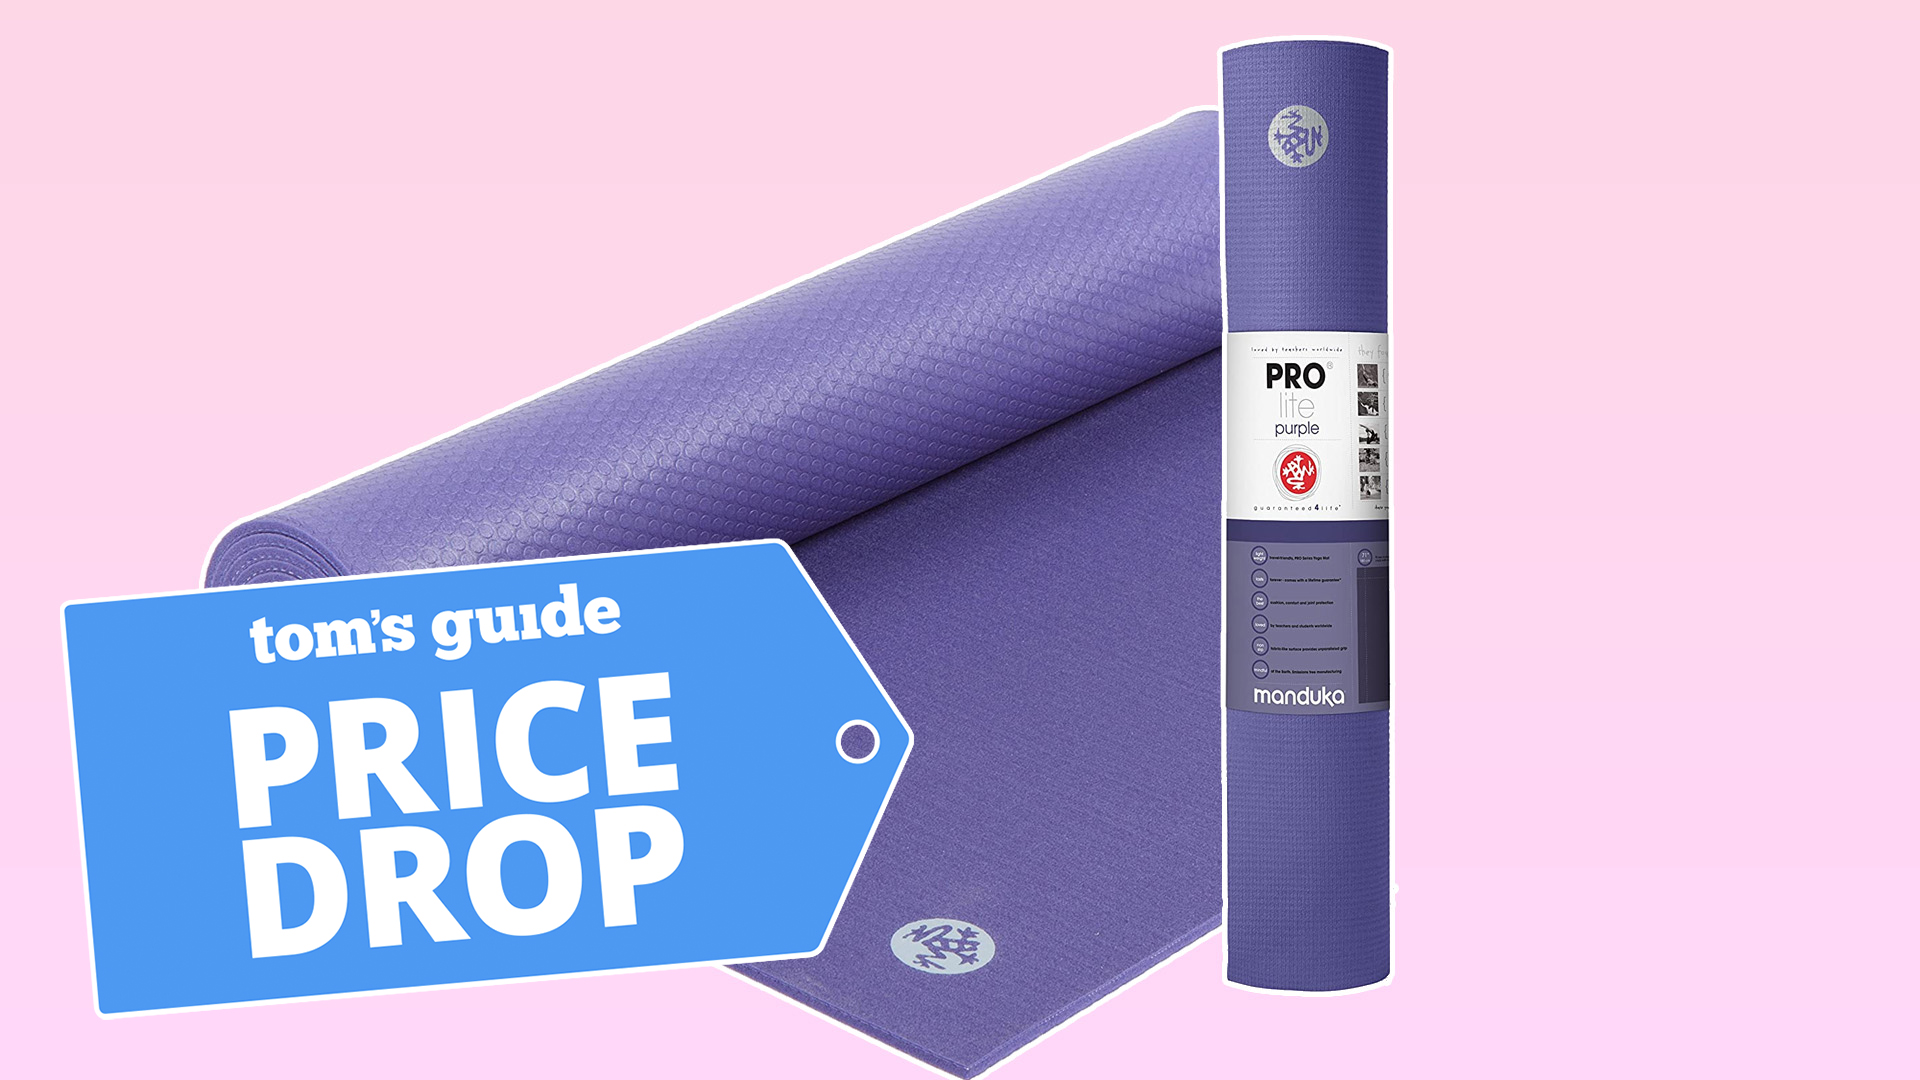 I use the Manduka PRO yoga mat for hot yoga — and now it's on sale